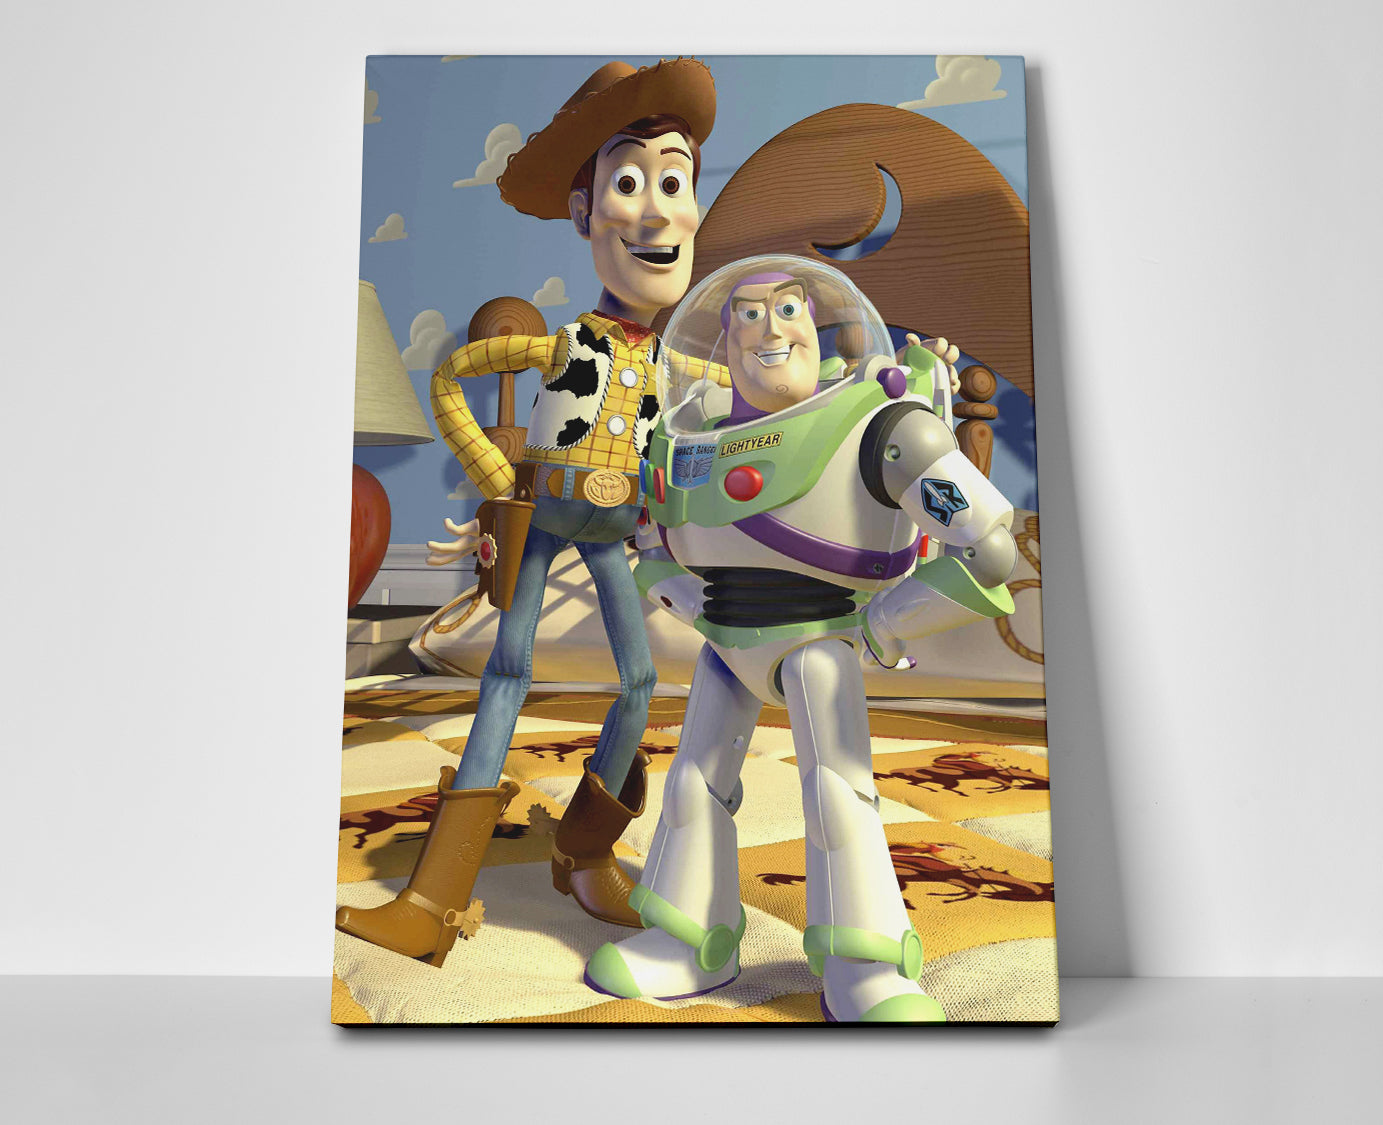 Toy Story Movie Poster canvas art